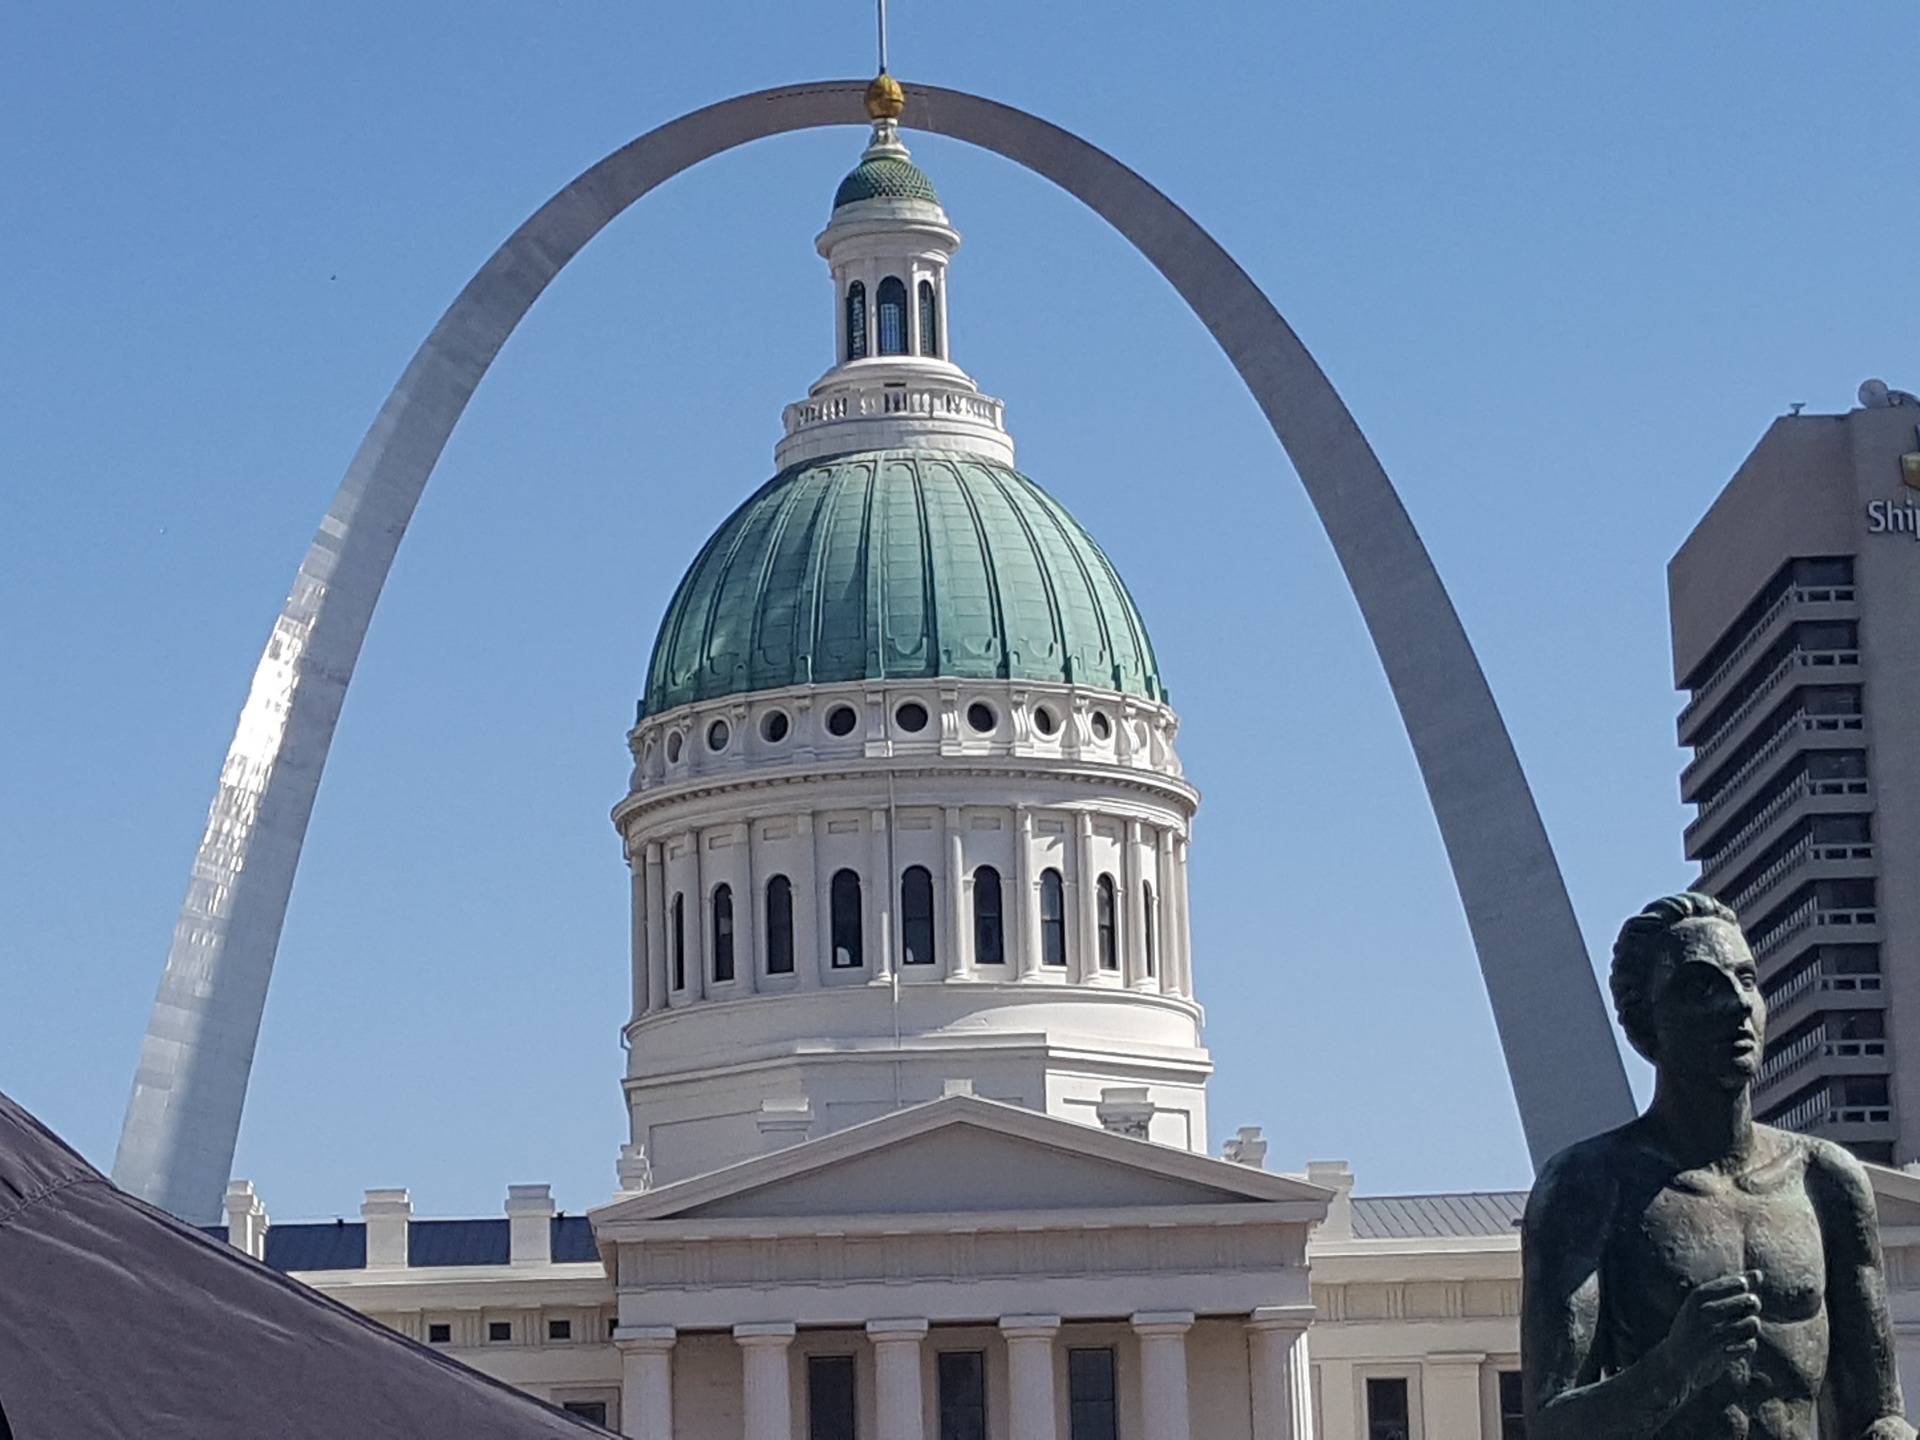 Gateway Arch and the Old Courthouse